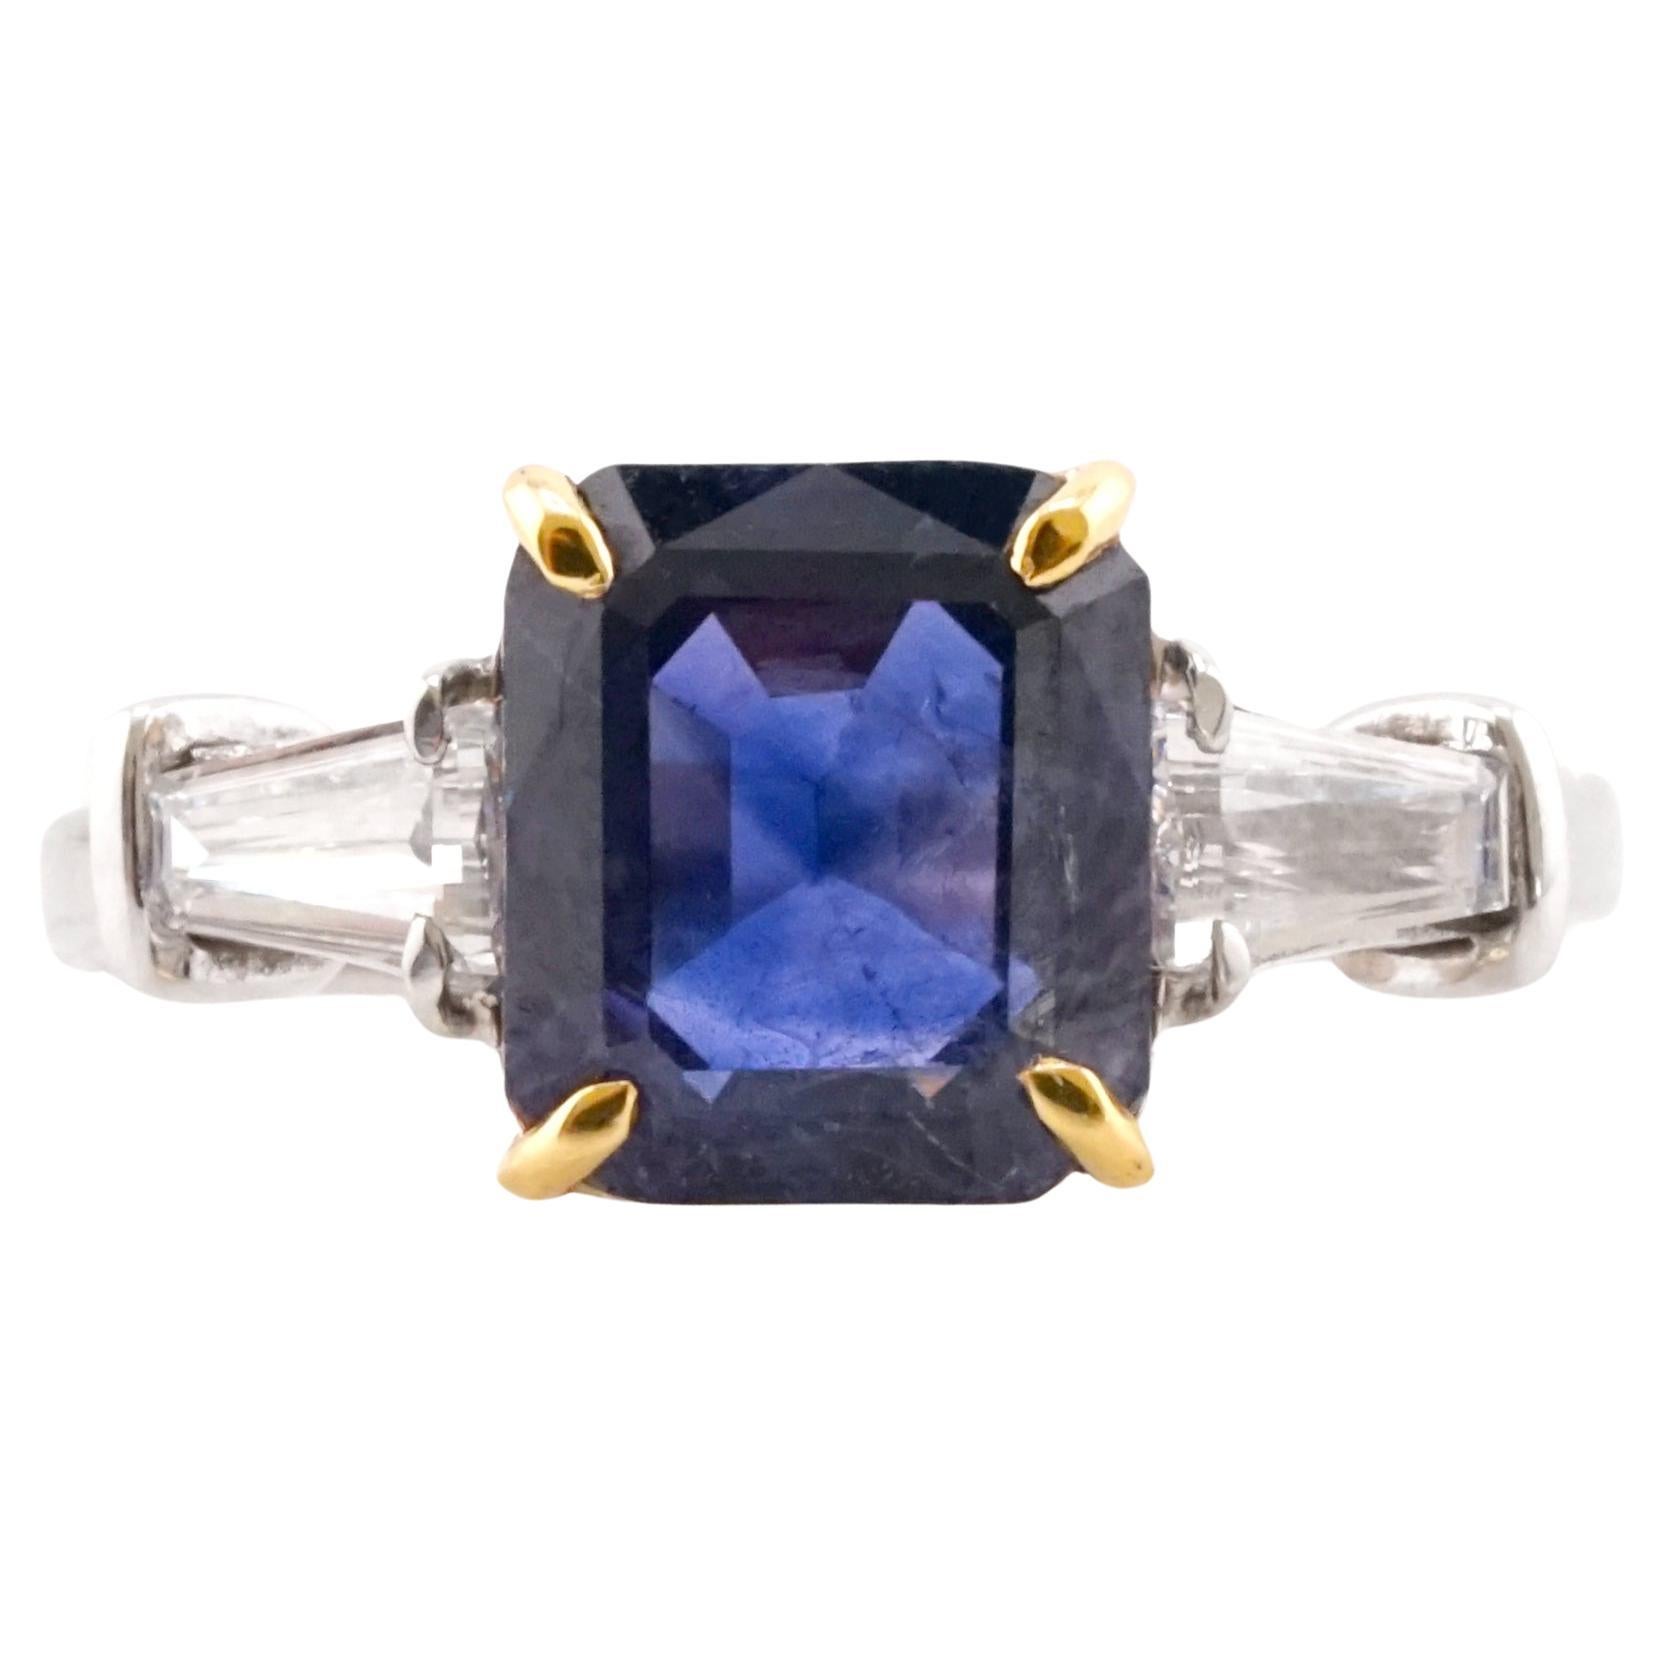 GRS 4.23 Carat Unheated Sapphire 18K white and Yellow Gold Ring